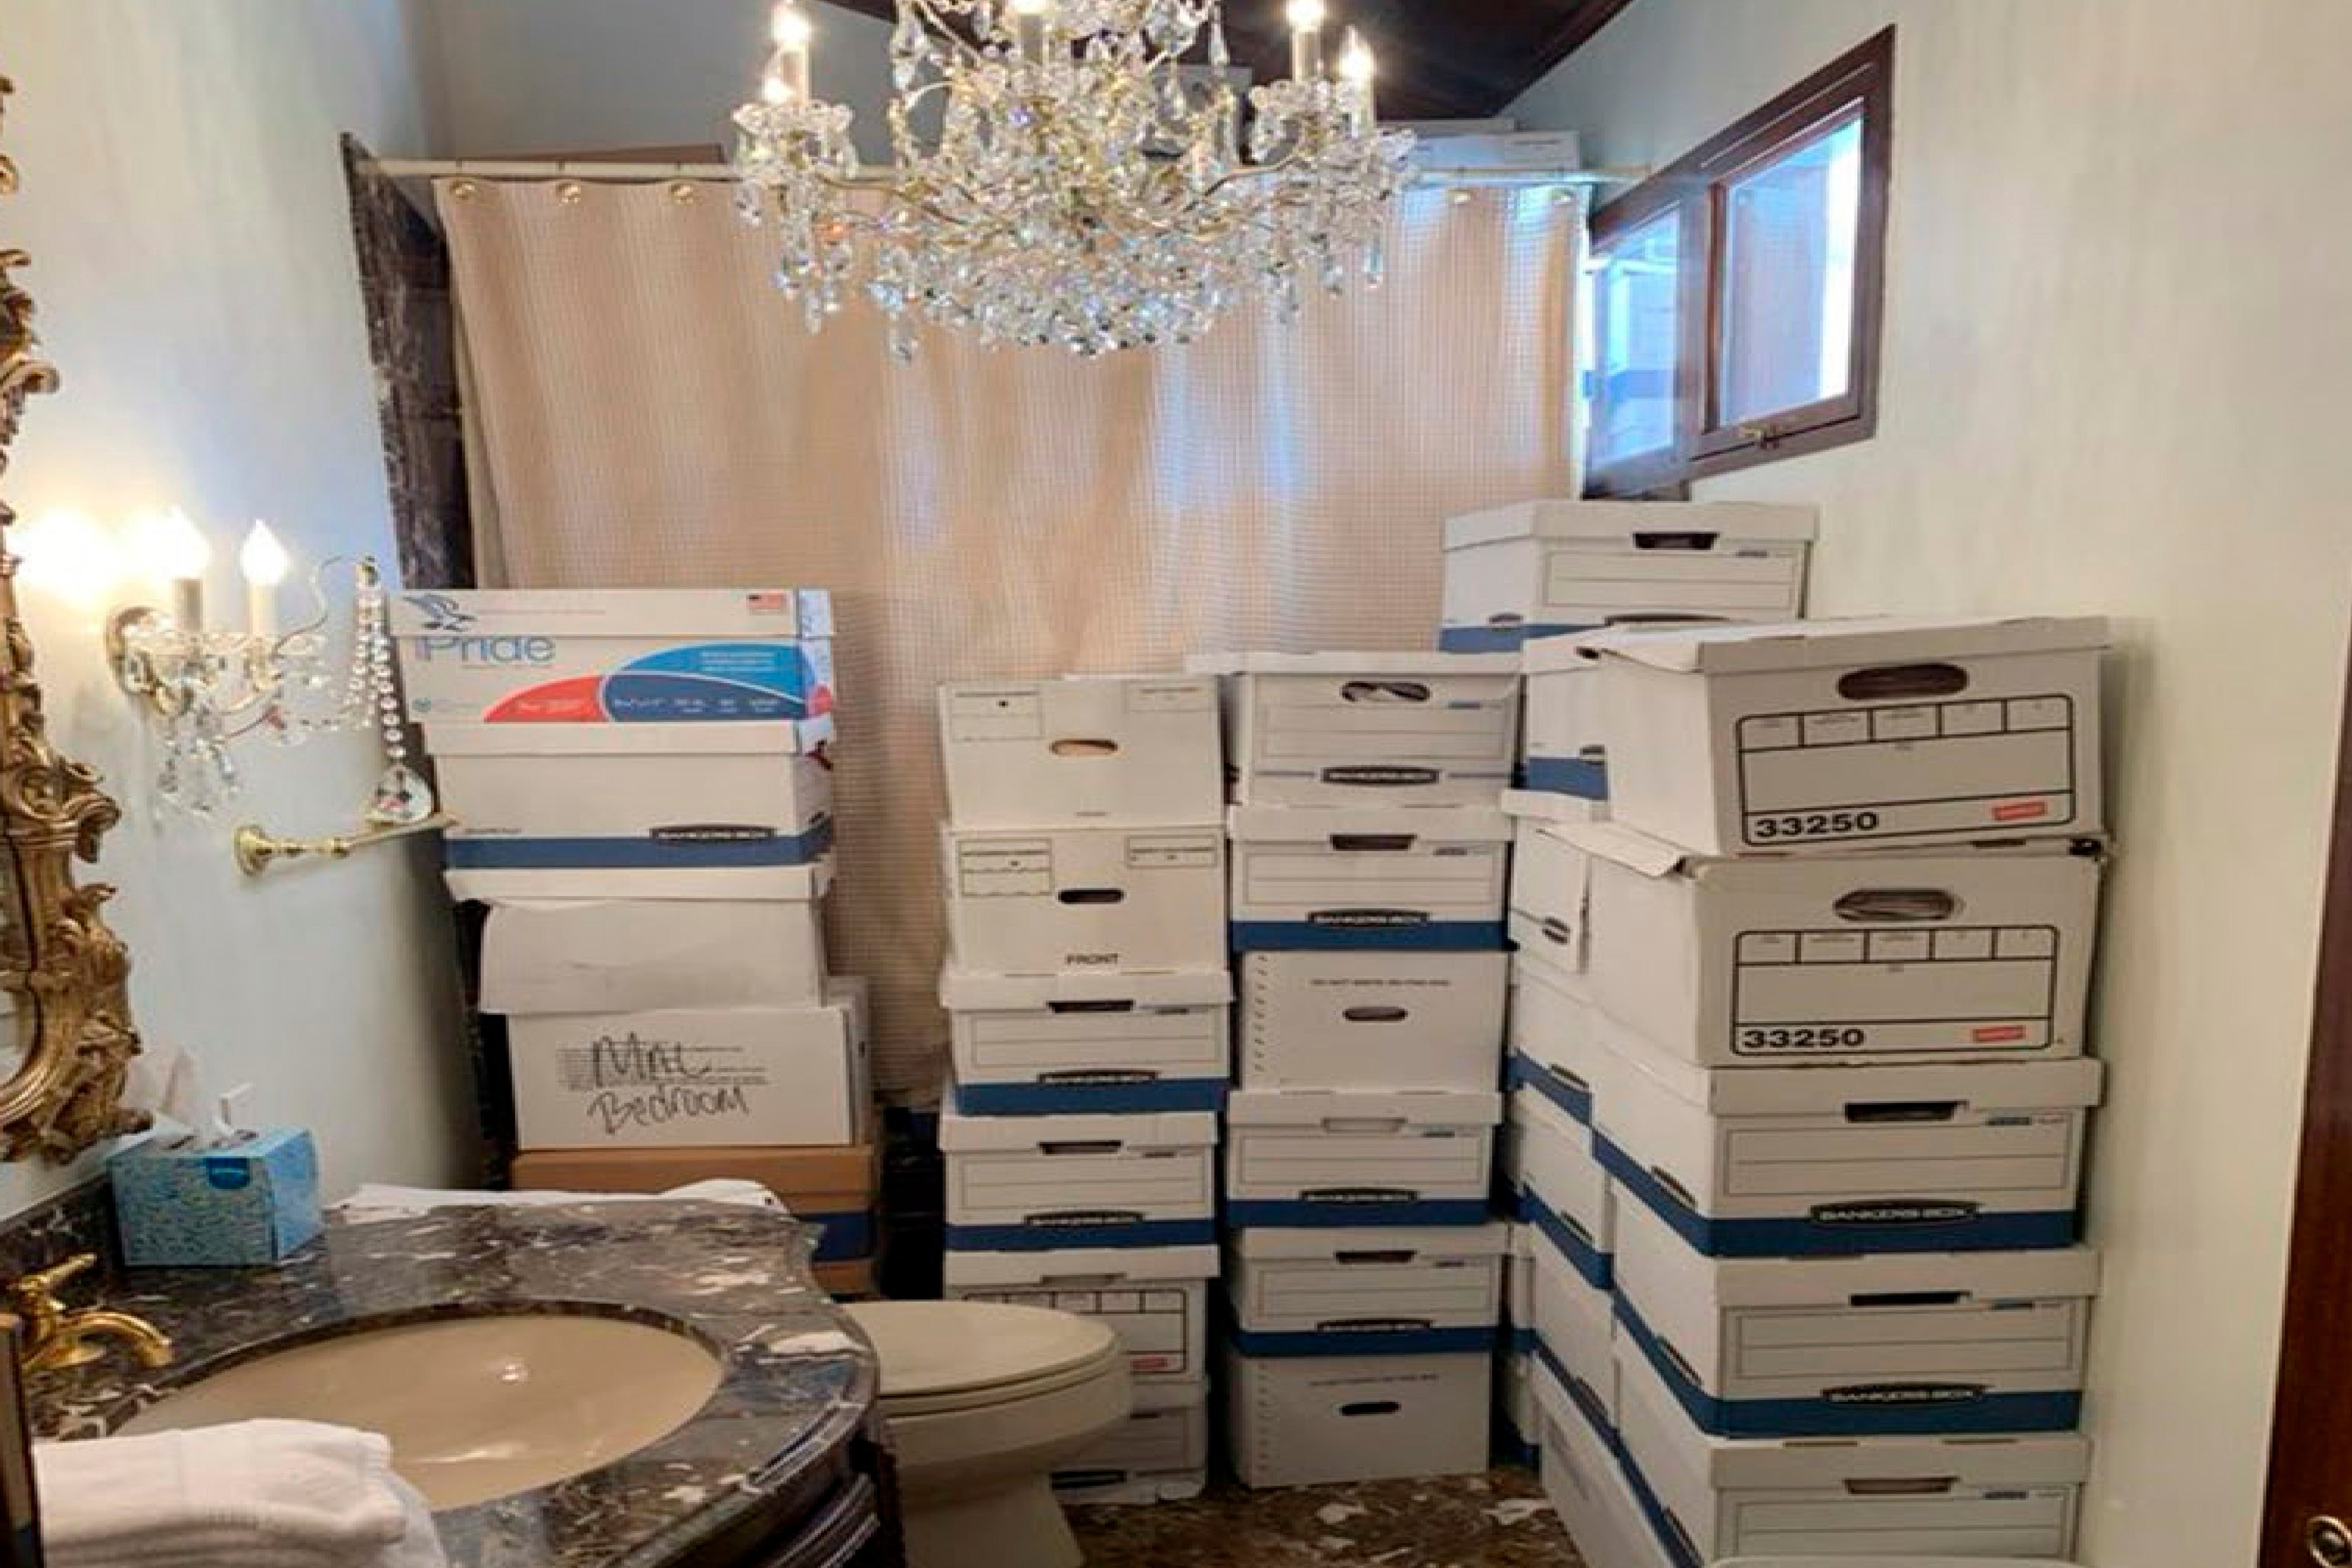 Boxes of records stored in a bathroom and shower in the Lake Room at Trump's Mar-a-Lago estate in Palm Beach, Florida